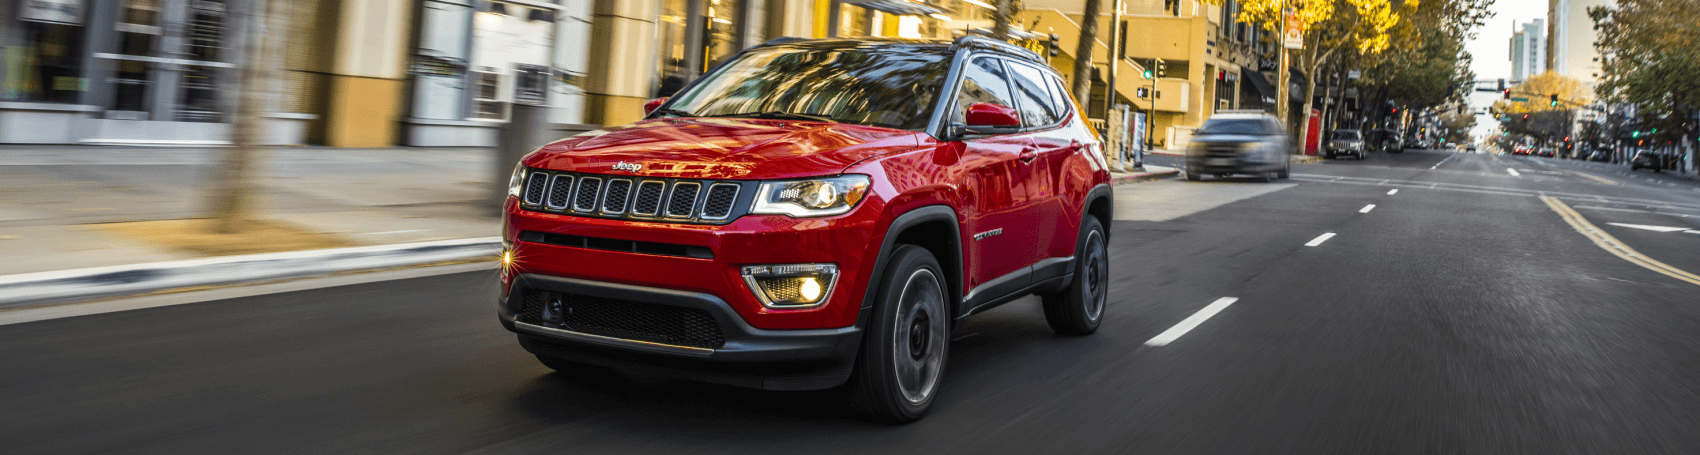 2021 Jeep Compass Limited Firecracker Red City Thornhill Chrysler Dodge Jeep Ram